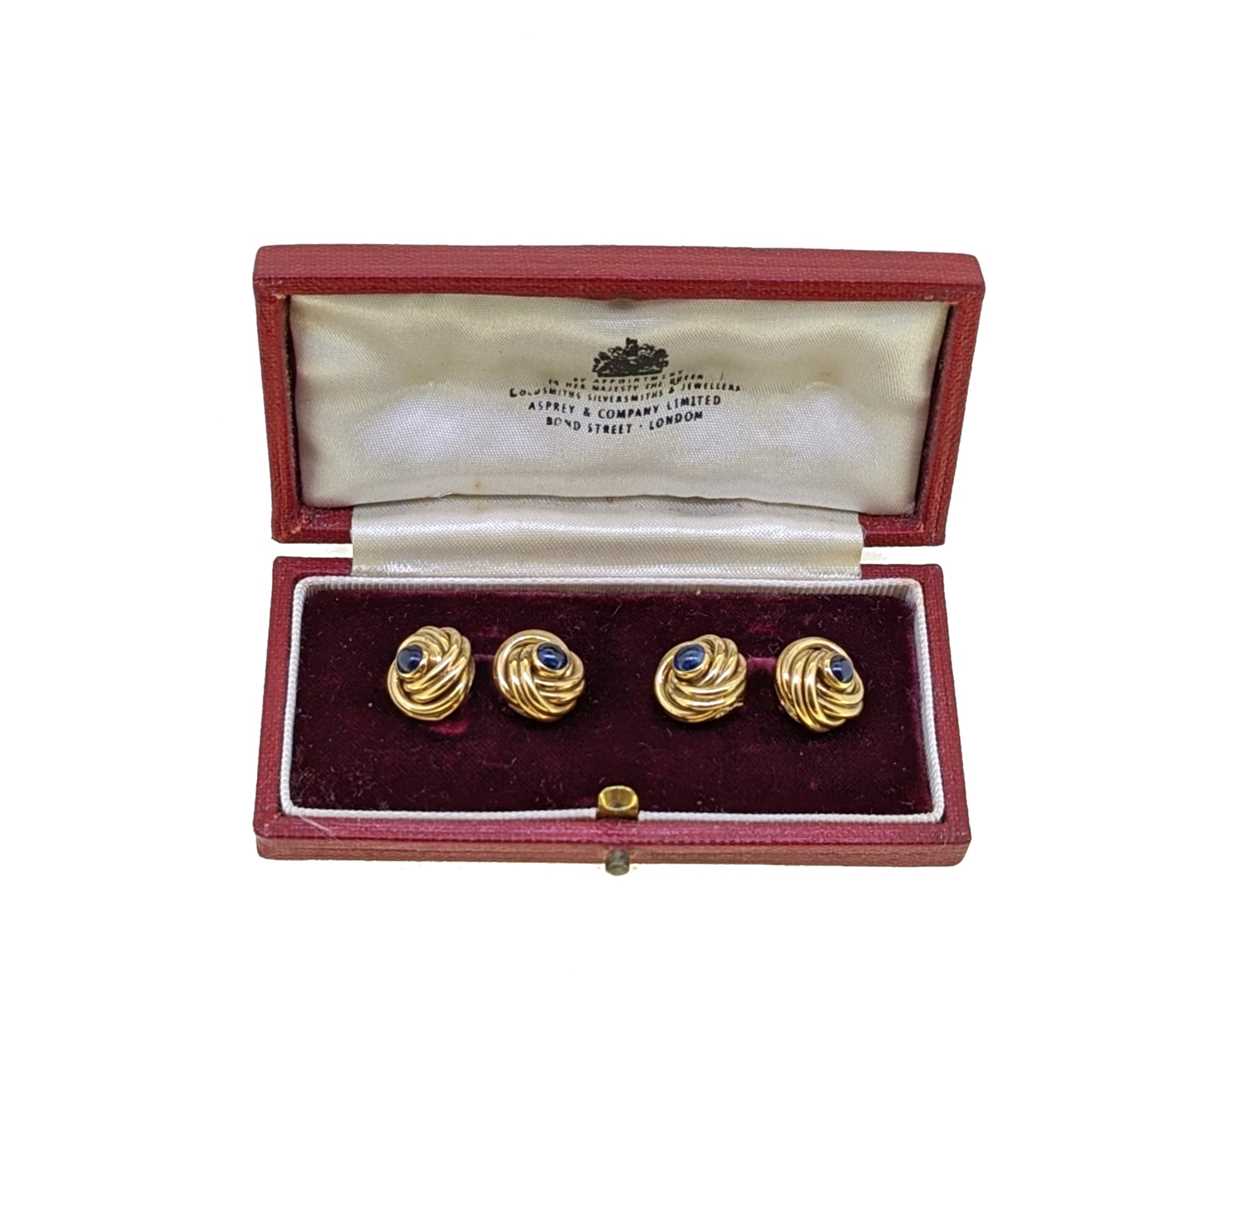 Kurt Weiss for Asprey - A pair of 9ct gold knot style cufflinks, - Image 2 of 3